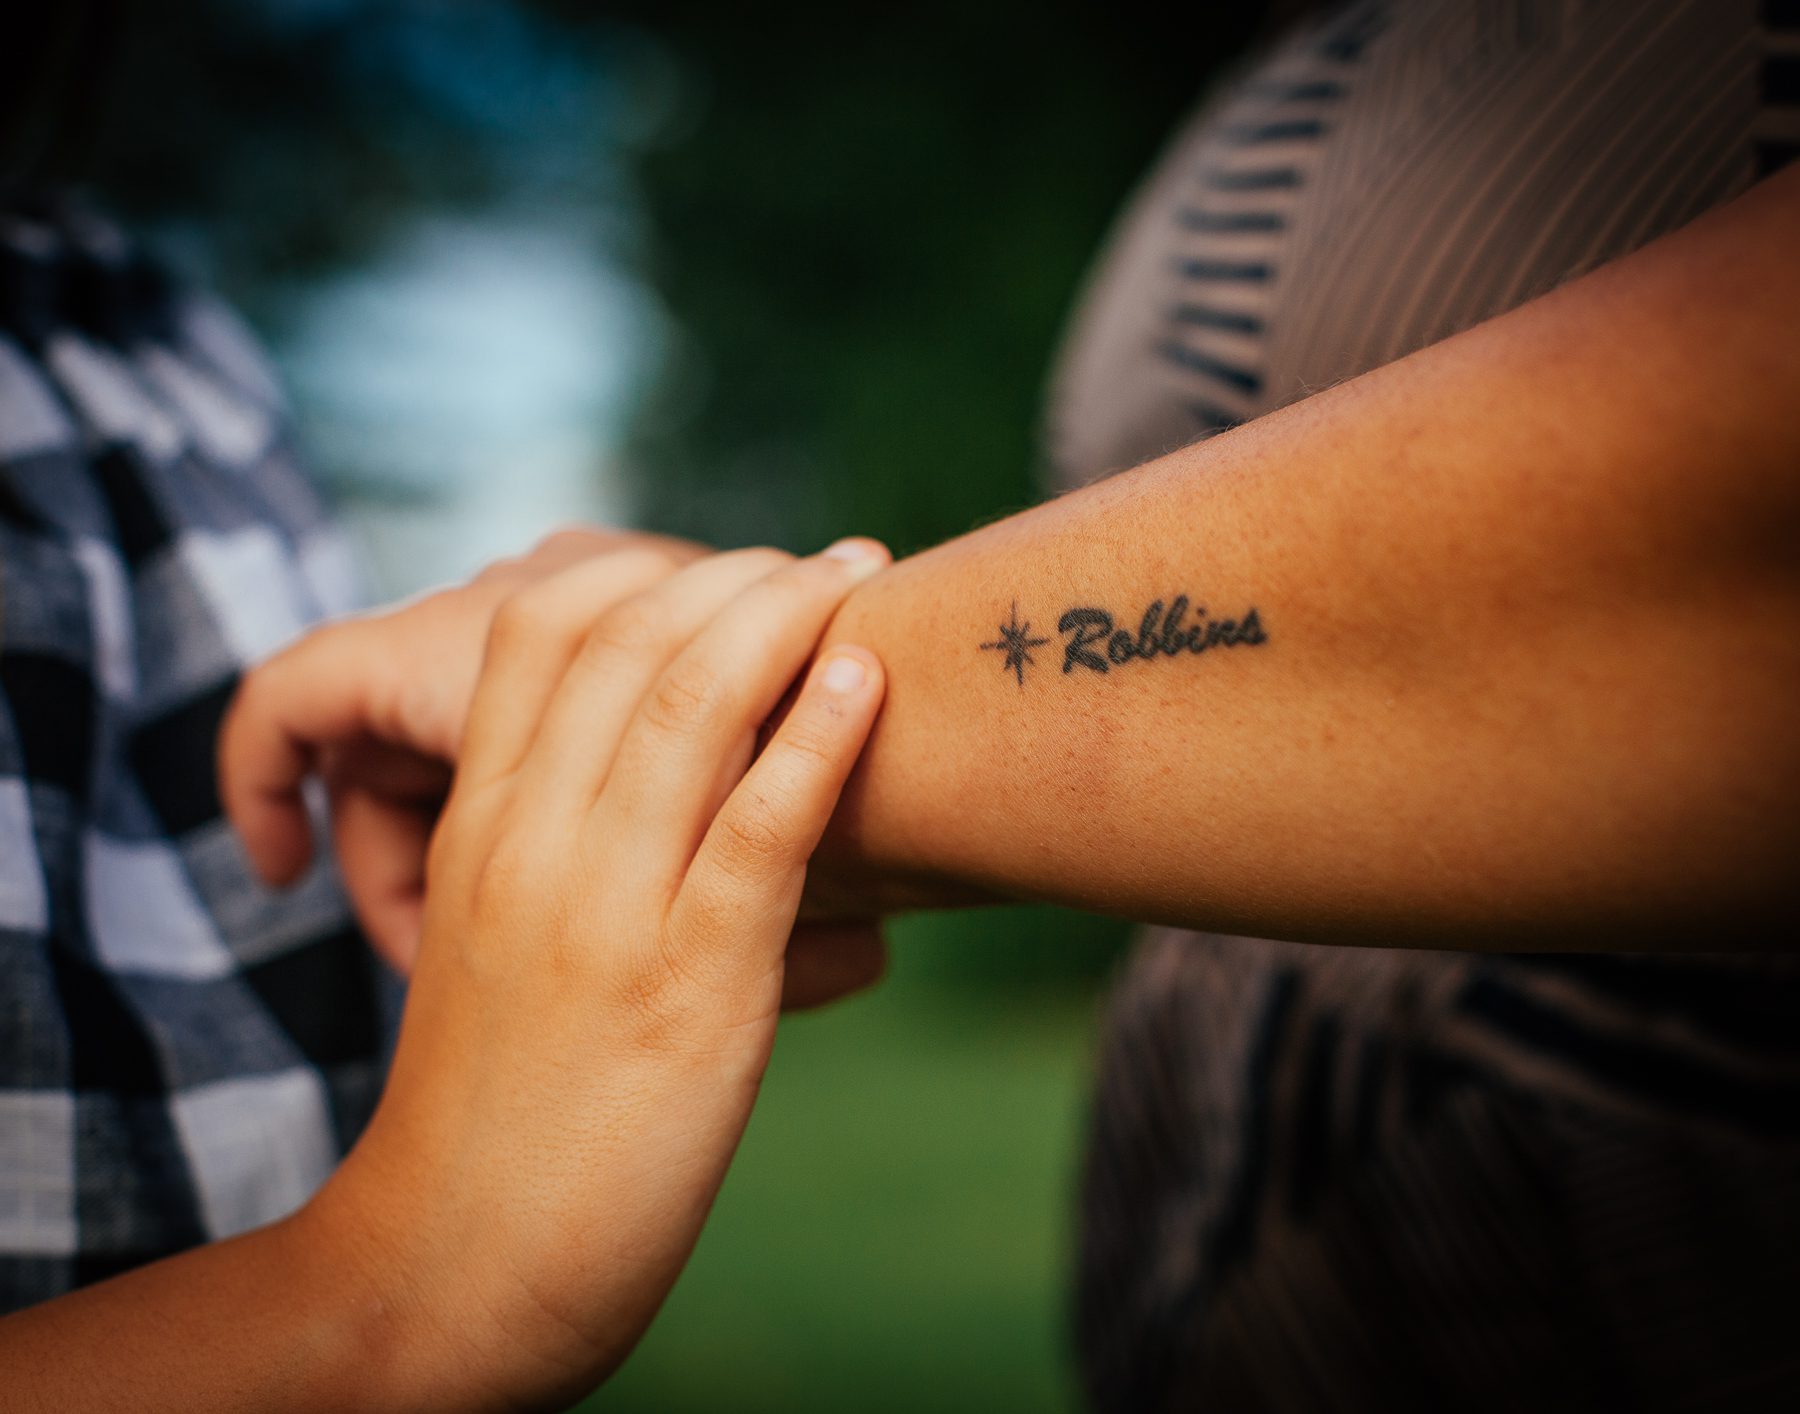 Michelle’s tattoo of the North Star represents what guided her ancestors and many others north to Canada — “the promised land.”  “Robbins,” Michelle’s last name, is the name of her ancestor’s “master.”